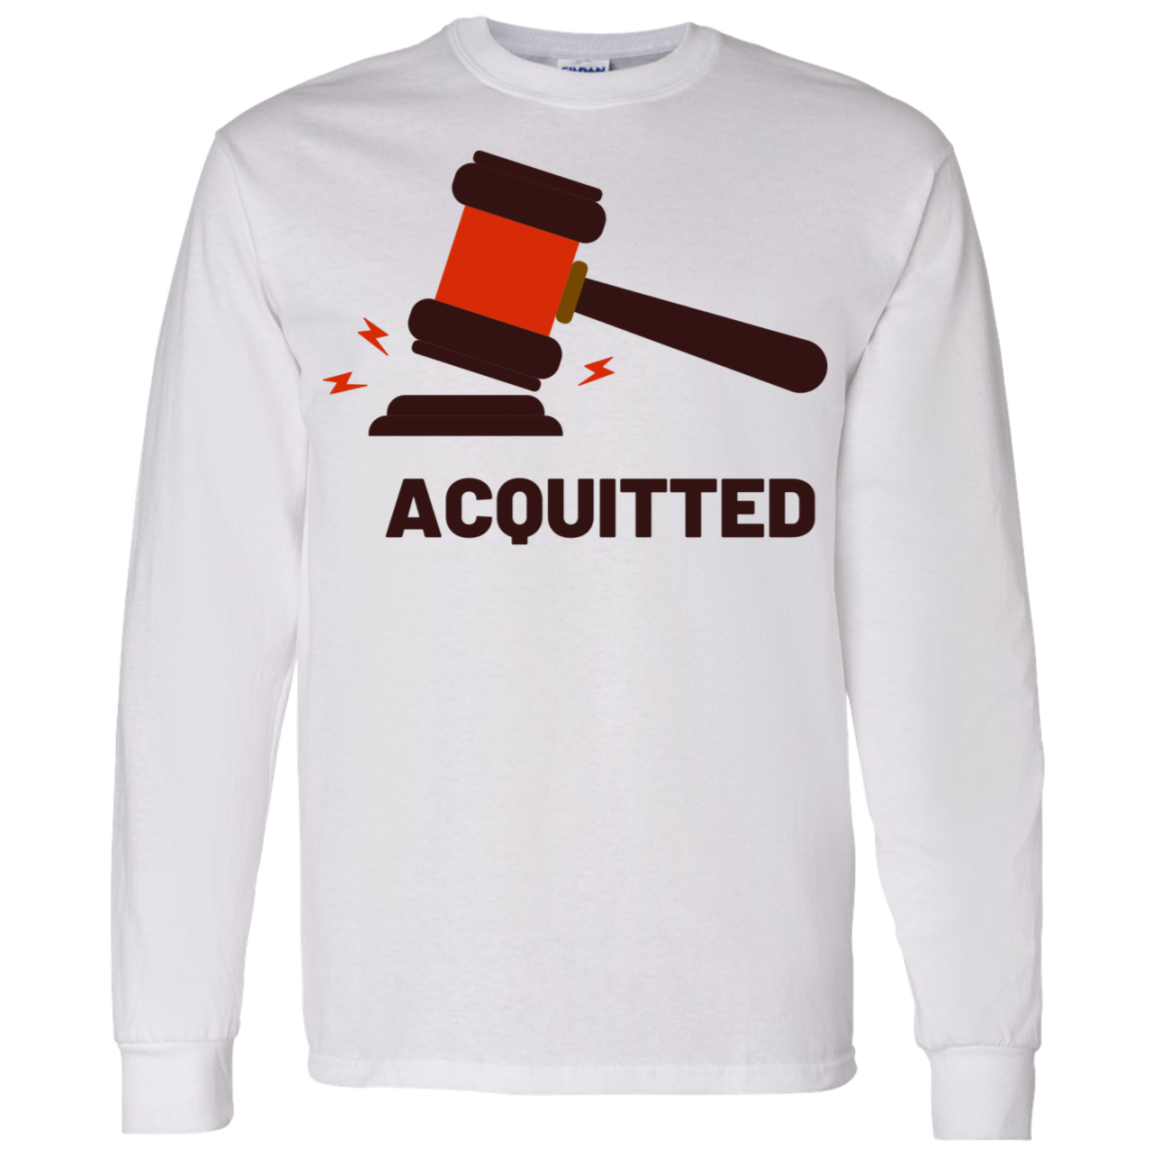 Acquitted Gavel (Red) Long Sleeve T-Shirt - Trumpshop.net